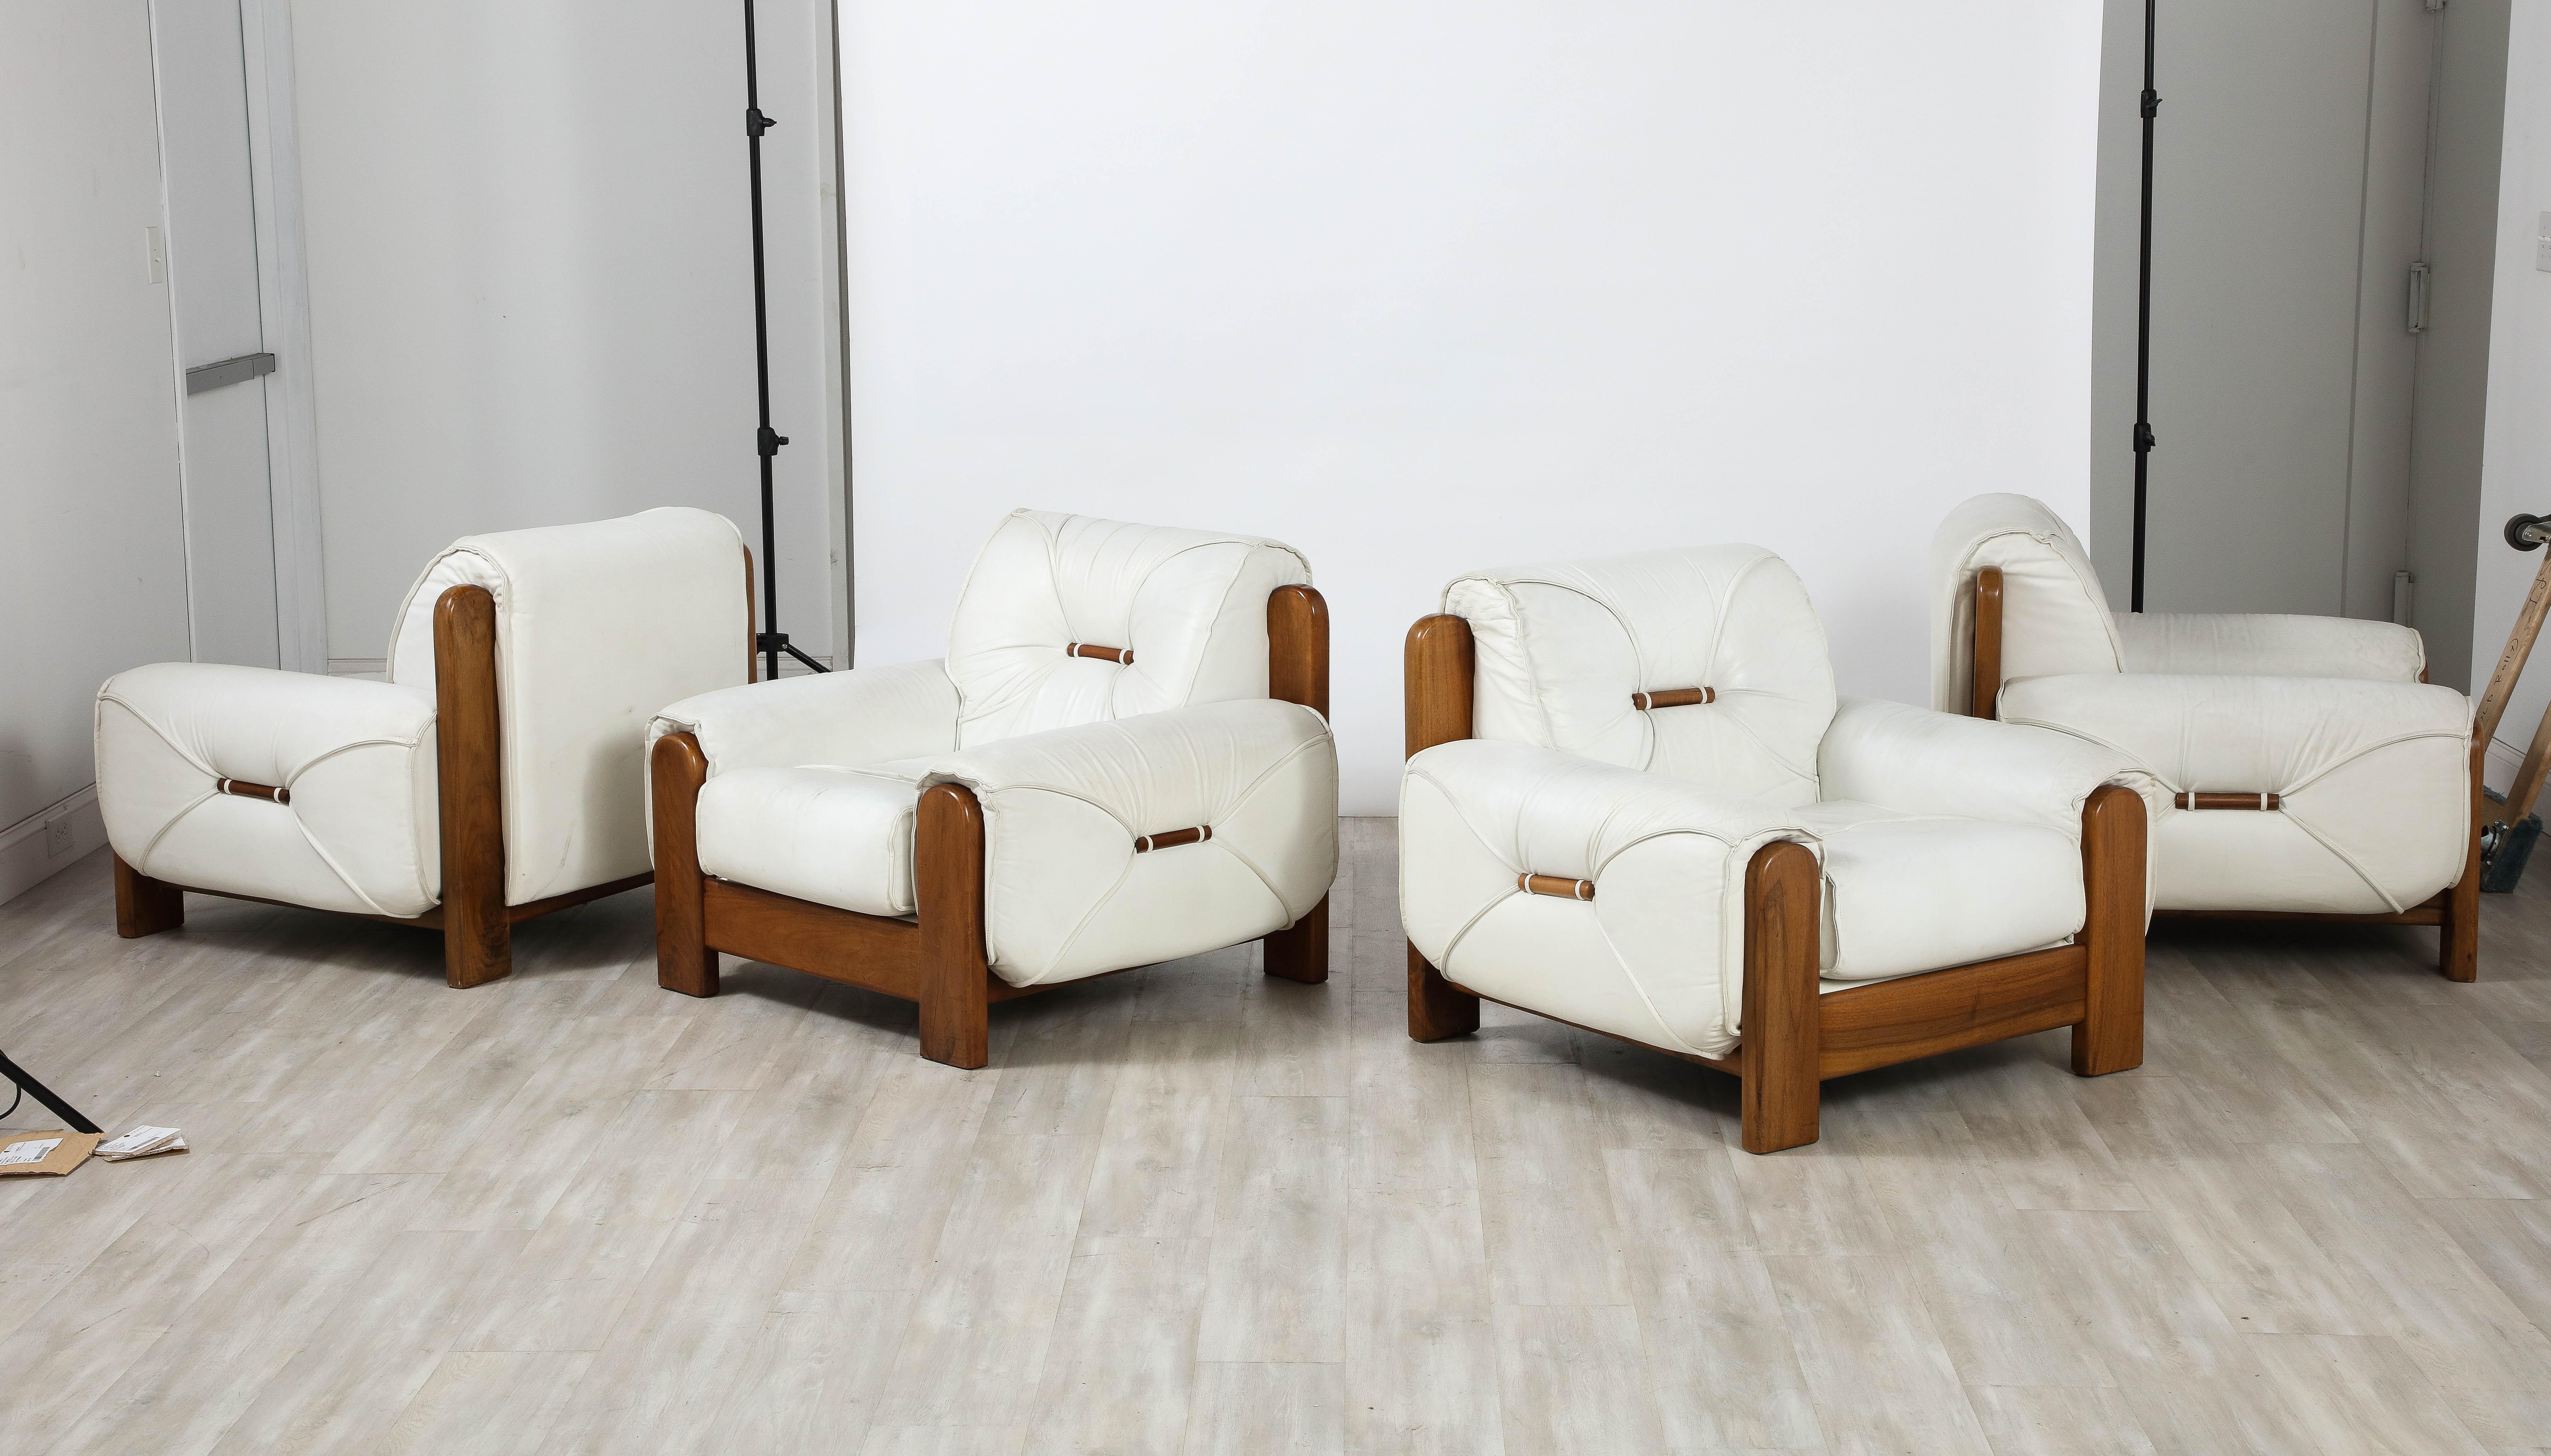 A highly unique and superb set of four Italian 1970's lounge chairs.  Hand-crafted with a nod toward the Brazilian iconic designers of the period, Jean Gillon and Sergio Rodrigues.  The robust walnut frames are a stunning contrast to the original